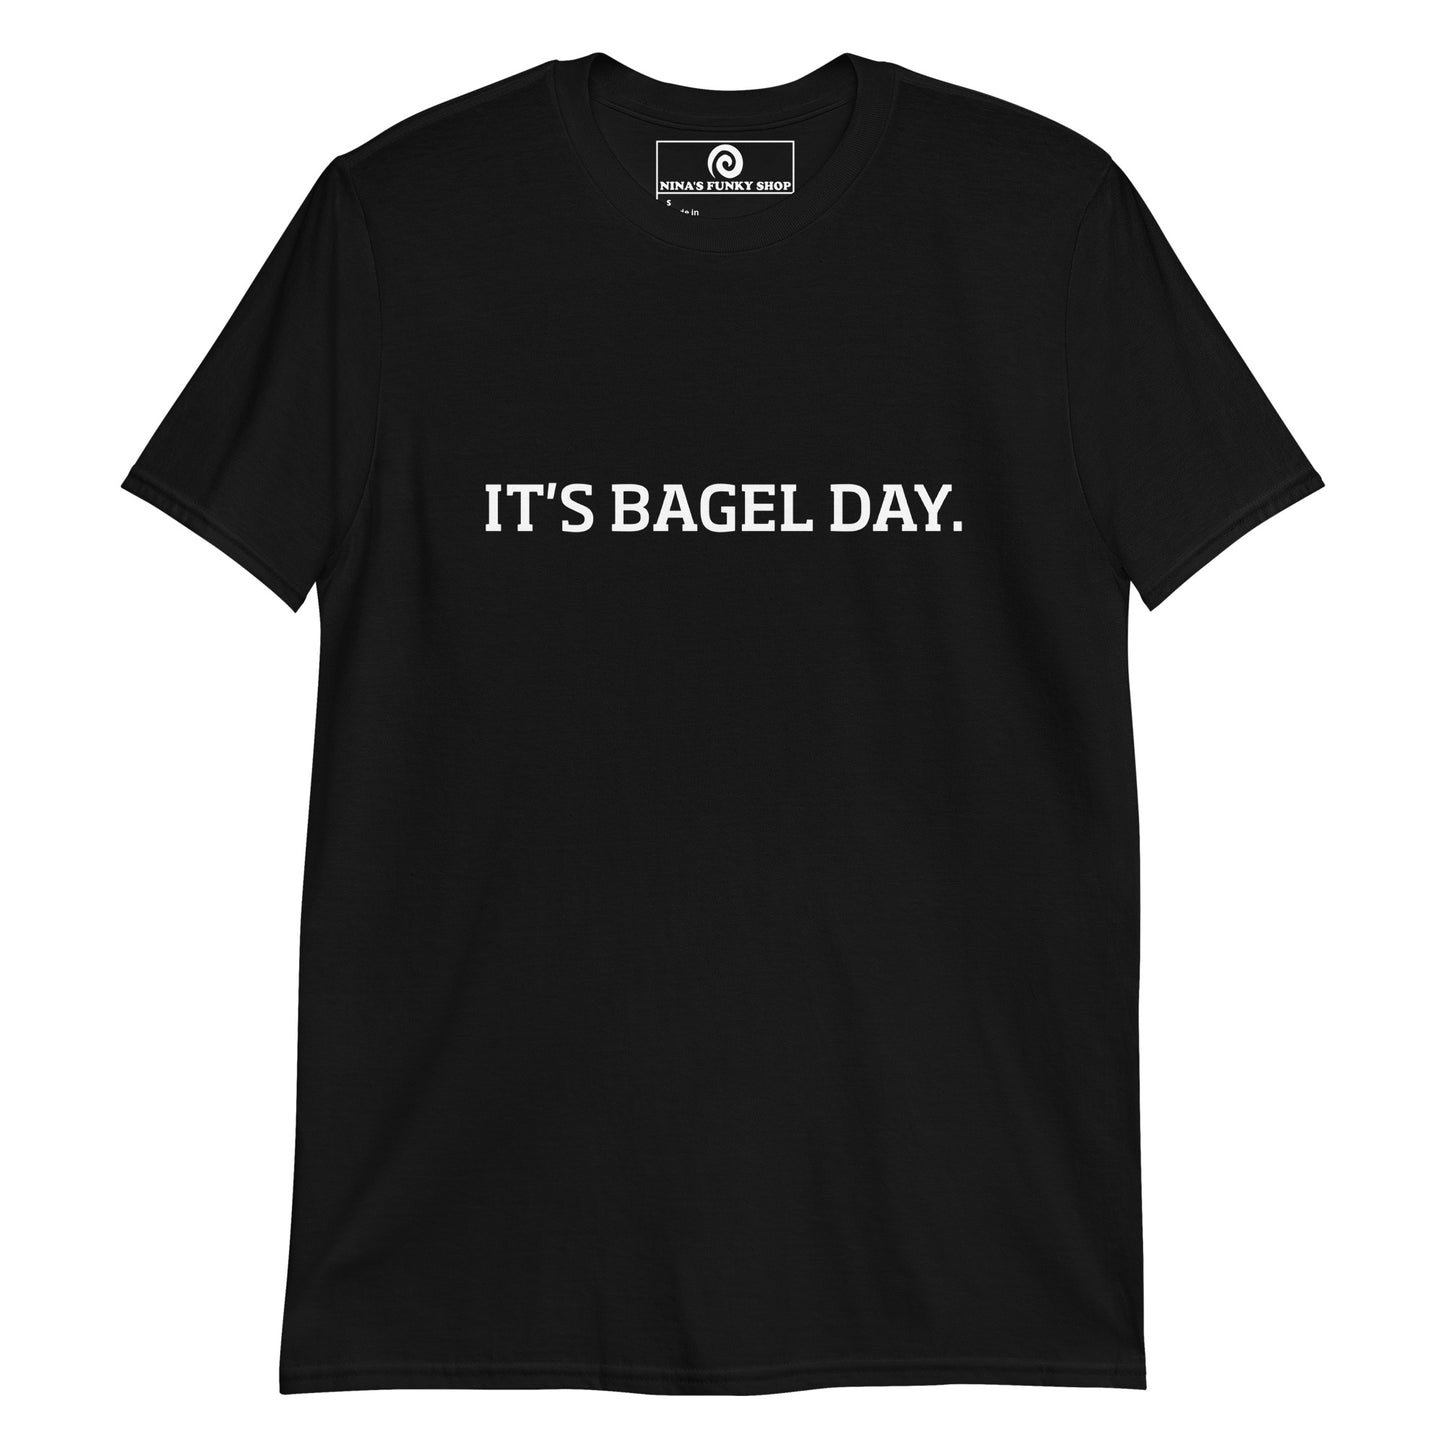 Black Bagel Day T-shirt - Everyday is bagel day! Love bagels? Looking for a funny gift for a bagel enthusiast? This bagel day t-shirt is just what you need. It's soft and comfortable with a simple bagel saying design, expertly printed on the front. The perfect funny foodie shirt for bagel lovers. Designed by Nina and made just for you.  